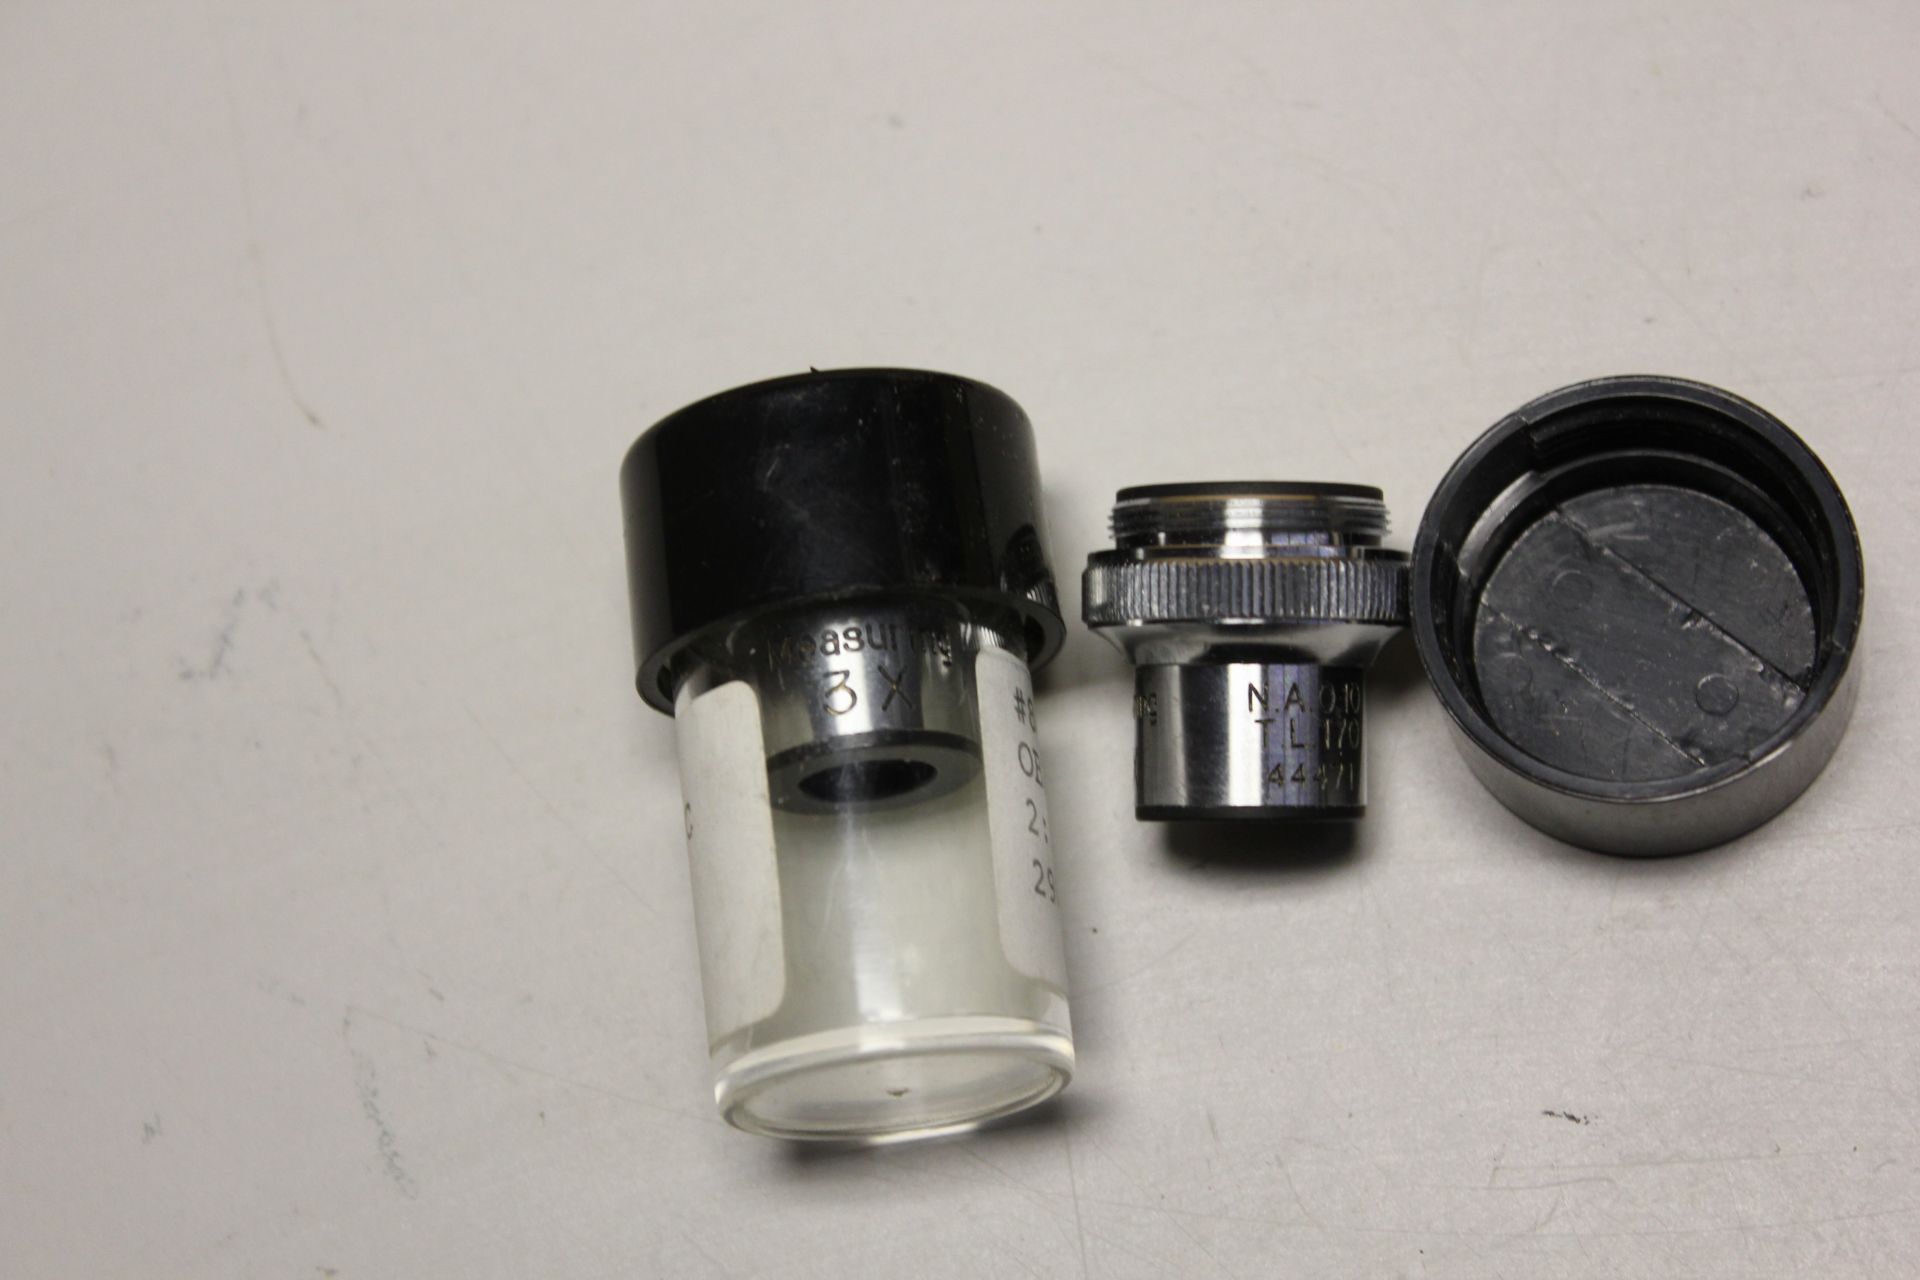 LOT OF MICROSCOPE PARTS - OBJECTIVES,EYE PIECES, ETC - Image 7 of 15